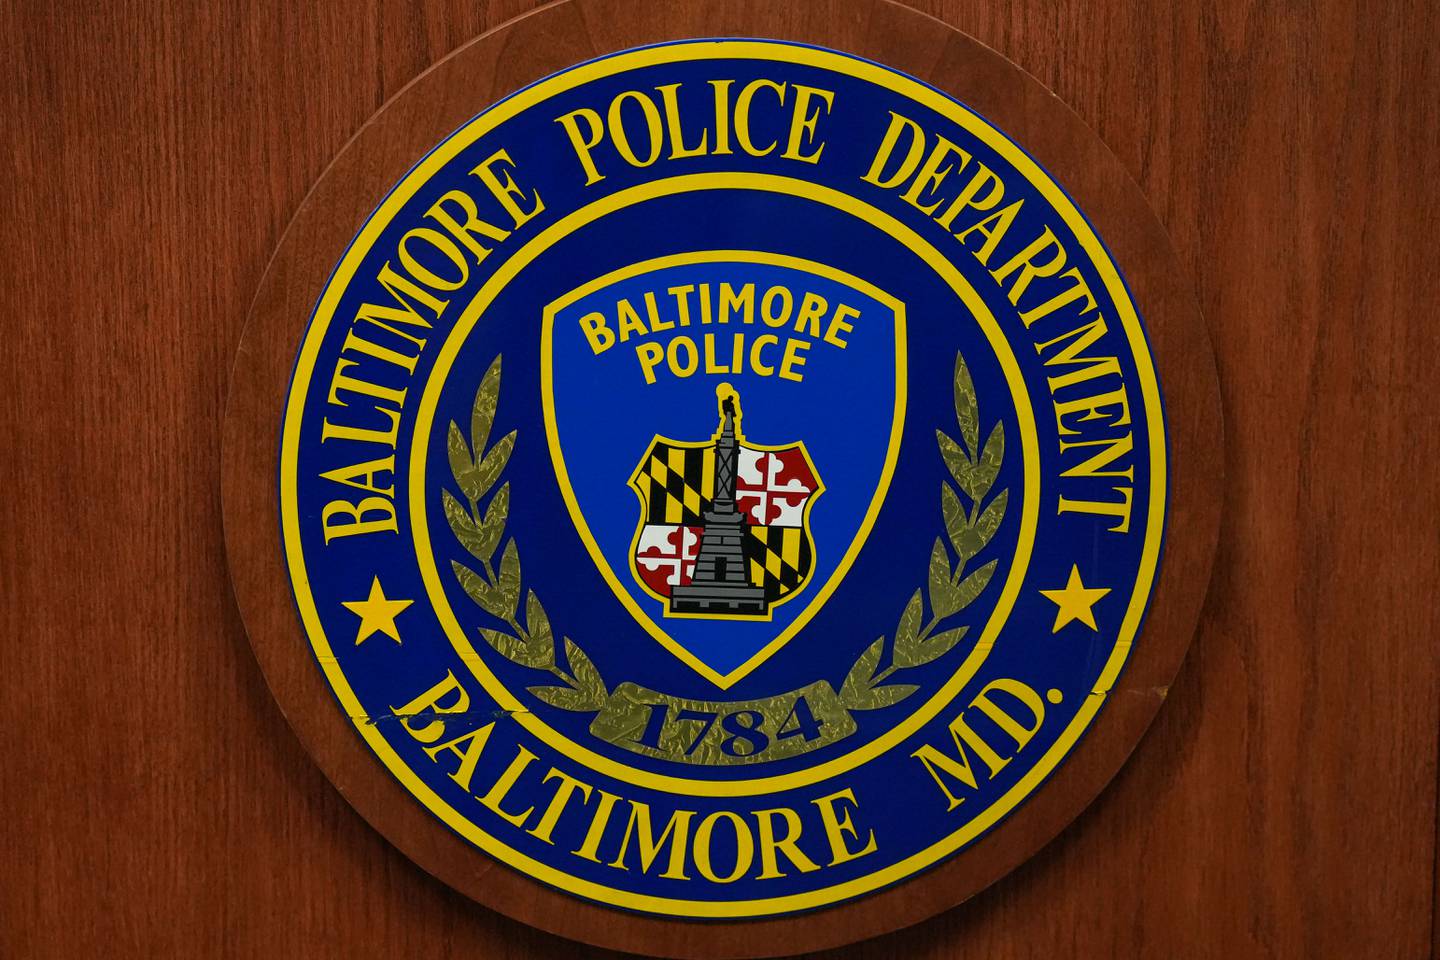 6/29/22—A detail of the Baltimore Police Department crest seen on a lectern in Baltimore City Police Headquarters.